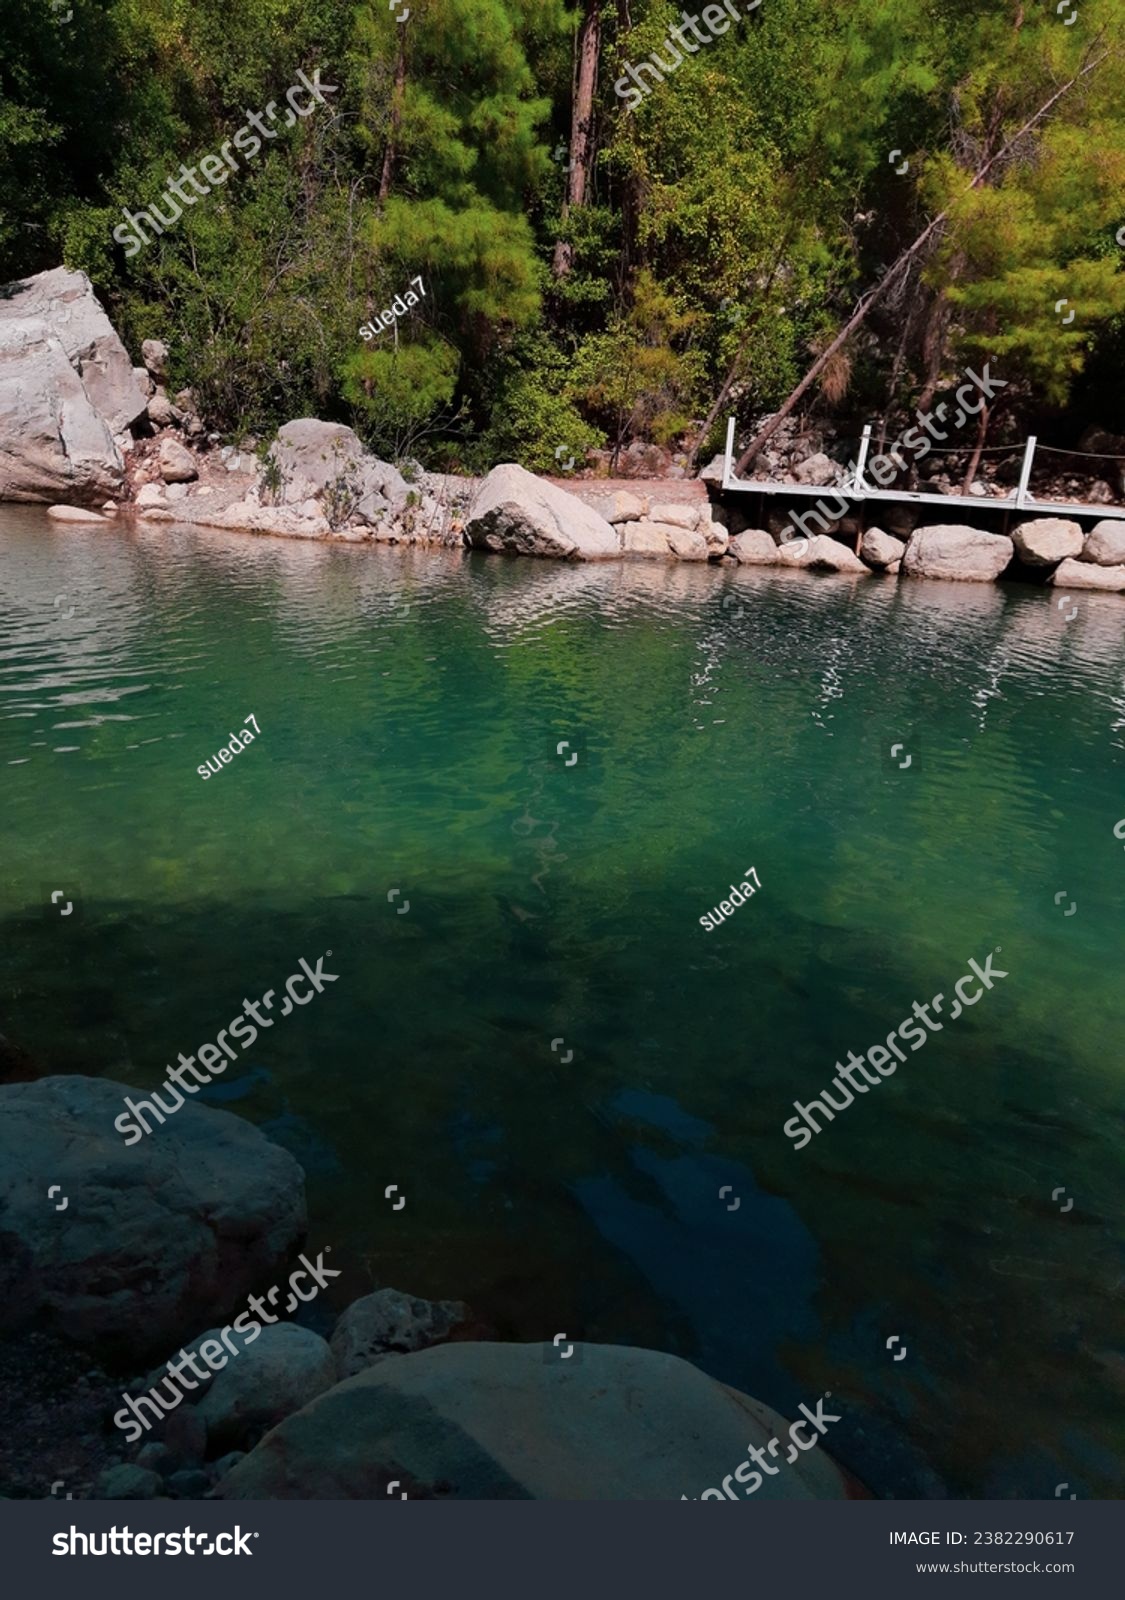 tourism, turquoise, trees, summer, scene, rock, amazing, beautiful, view, romantic, park, mine, sky, eastern, green, reflection, nature, tree, wonderful, water, outdoor, hill, blue, background, idylli #2382290617